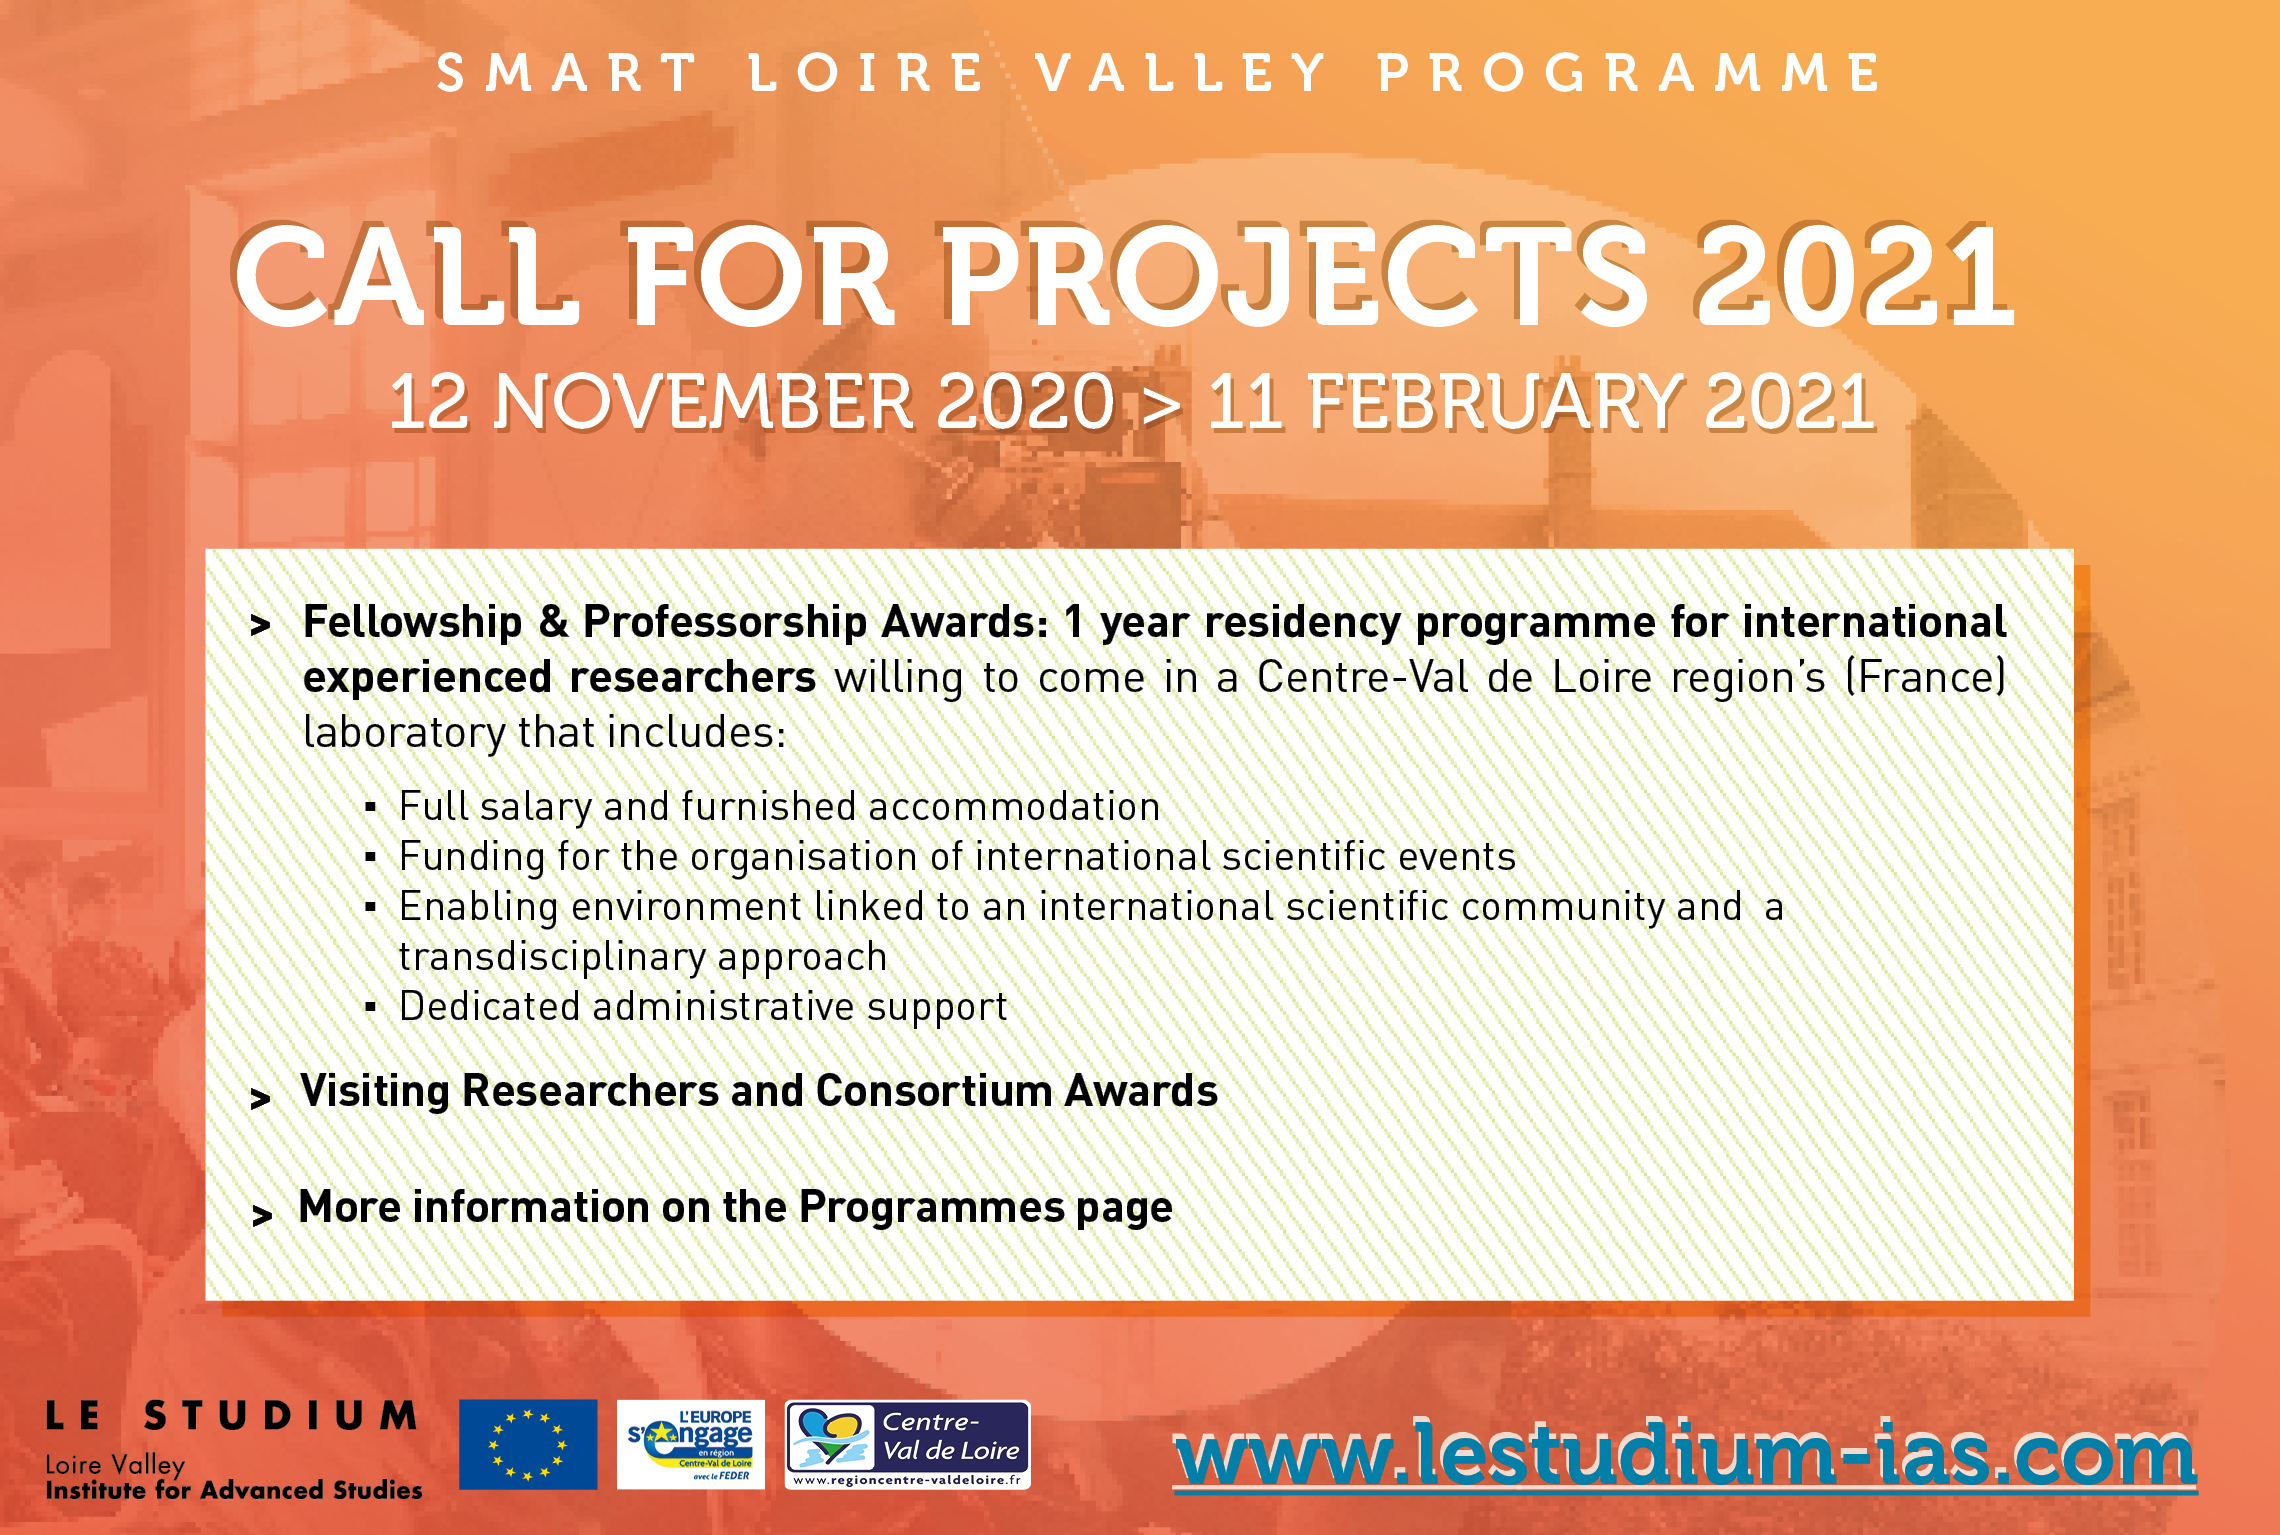 The call for projects 2021 is open | LE STUDIUM